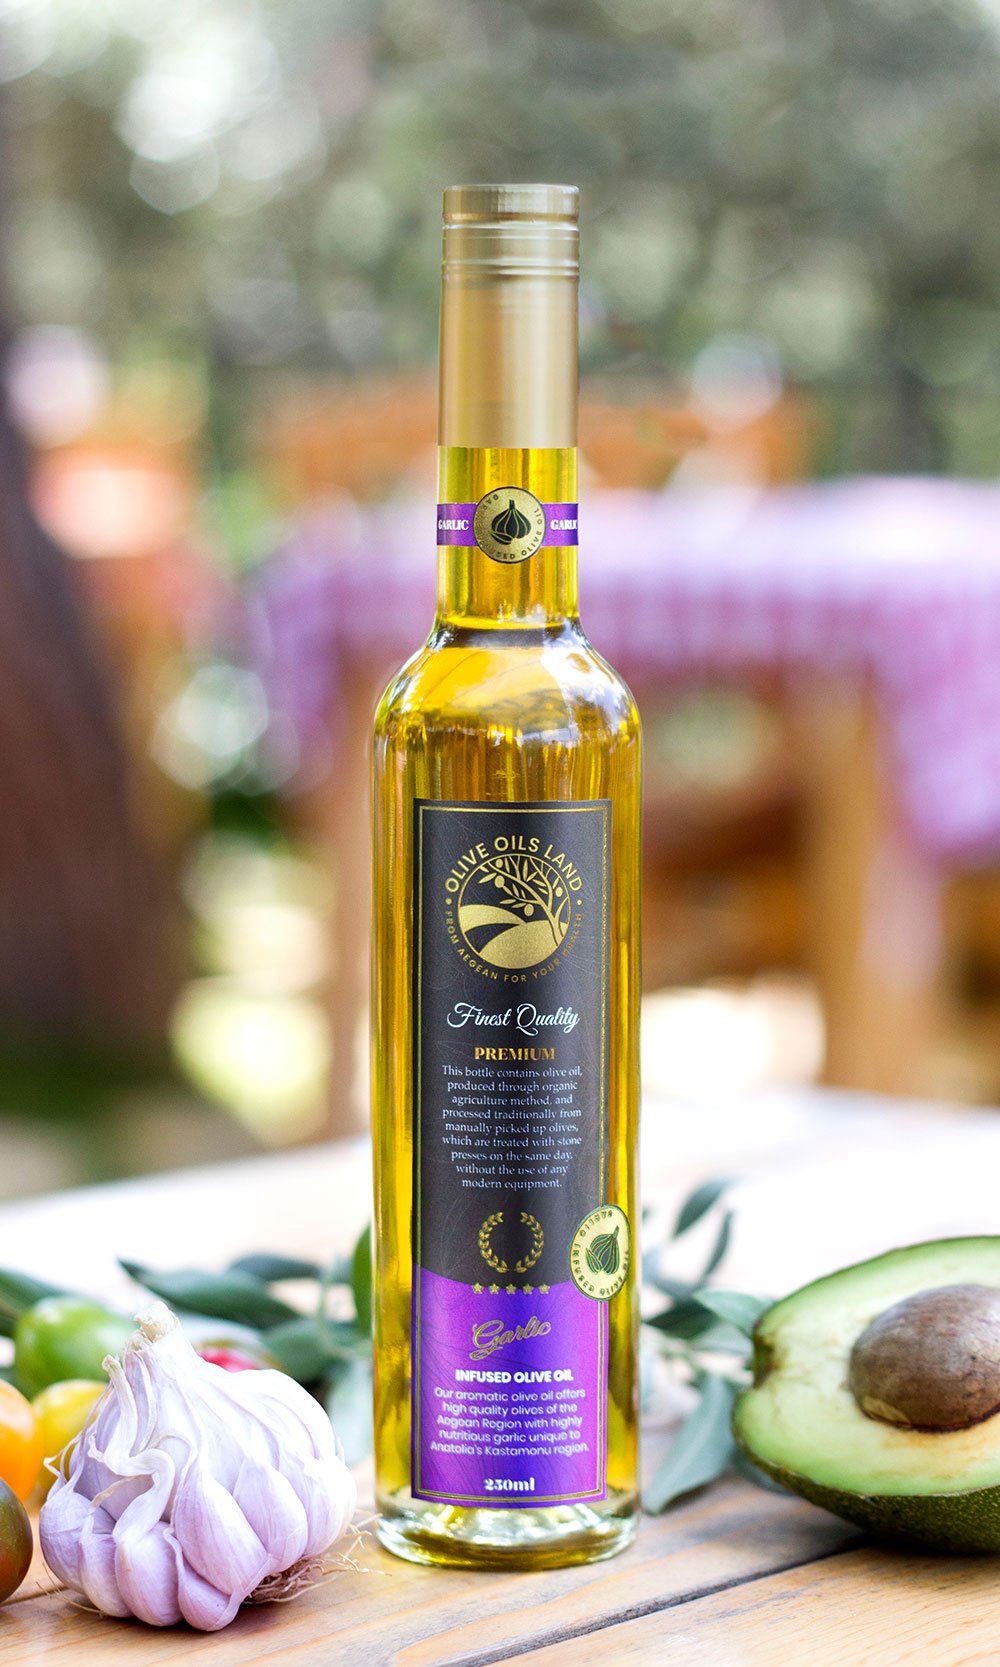 GARLIC FLAVOURED – INFUSED OLIVE OIL